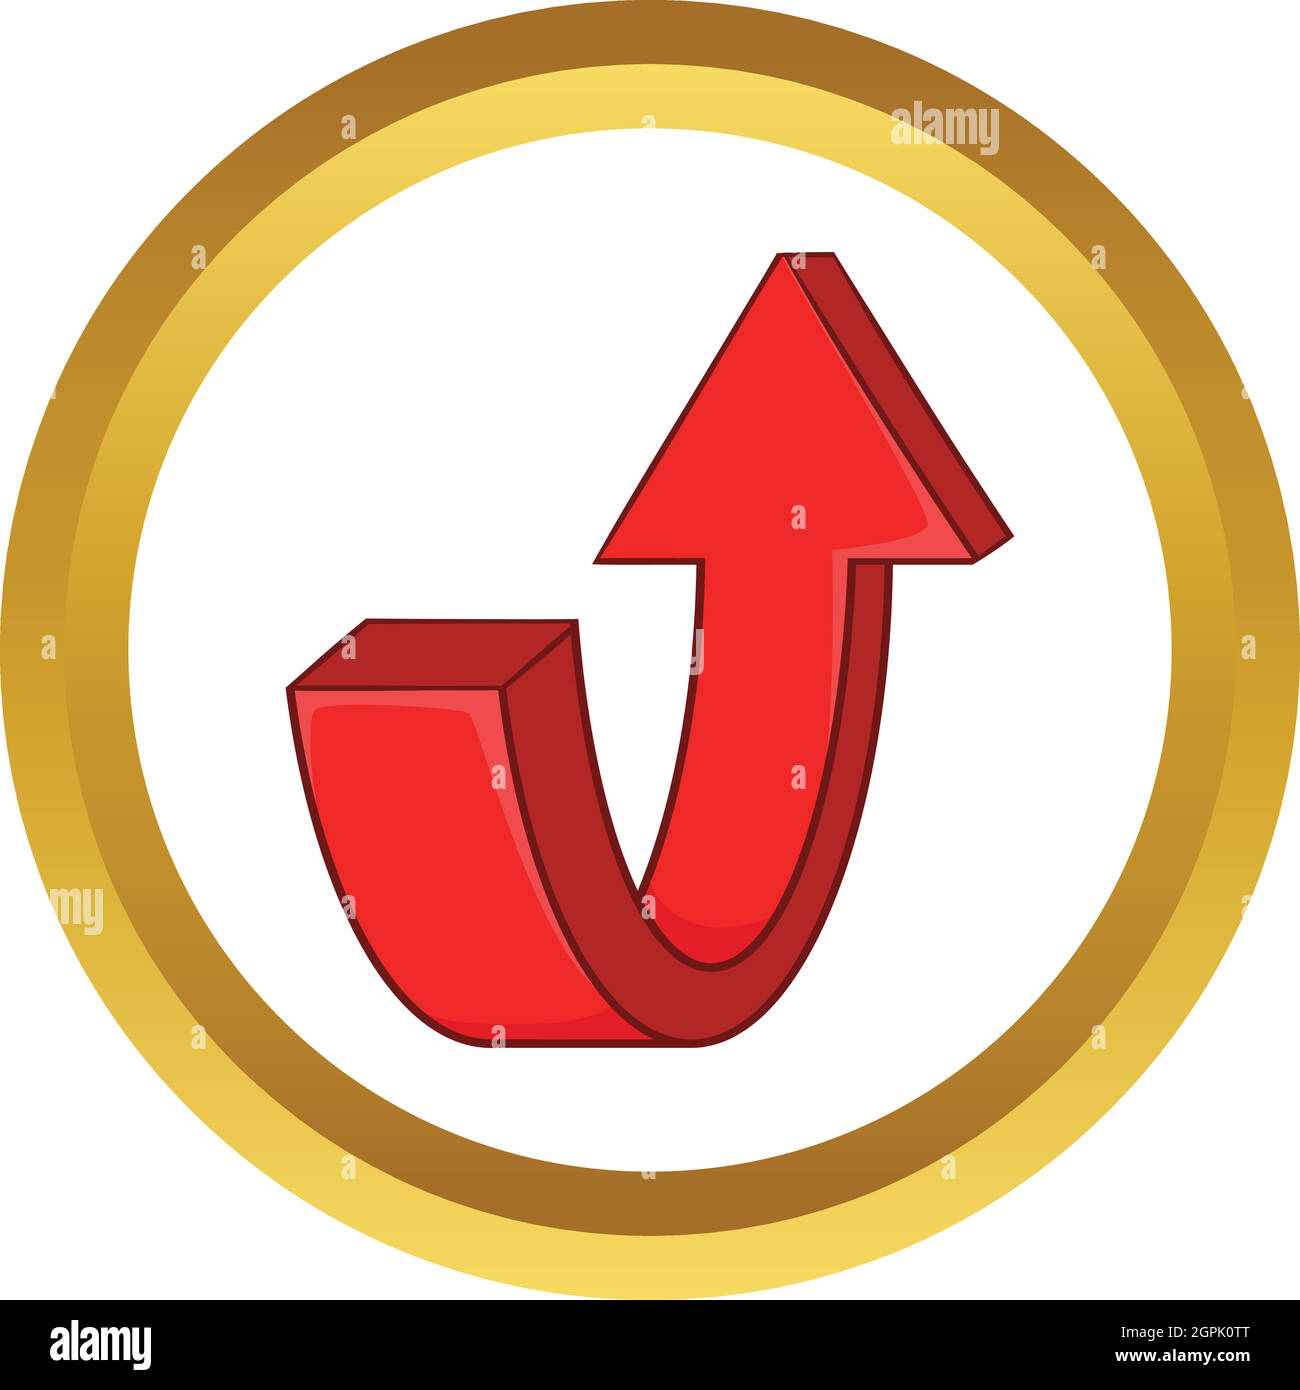 Red curved arrow vector icon Stock Vector